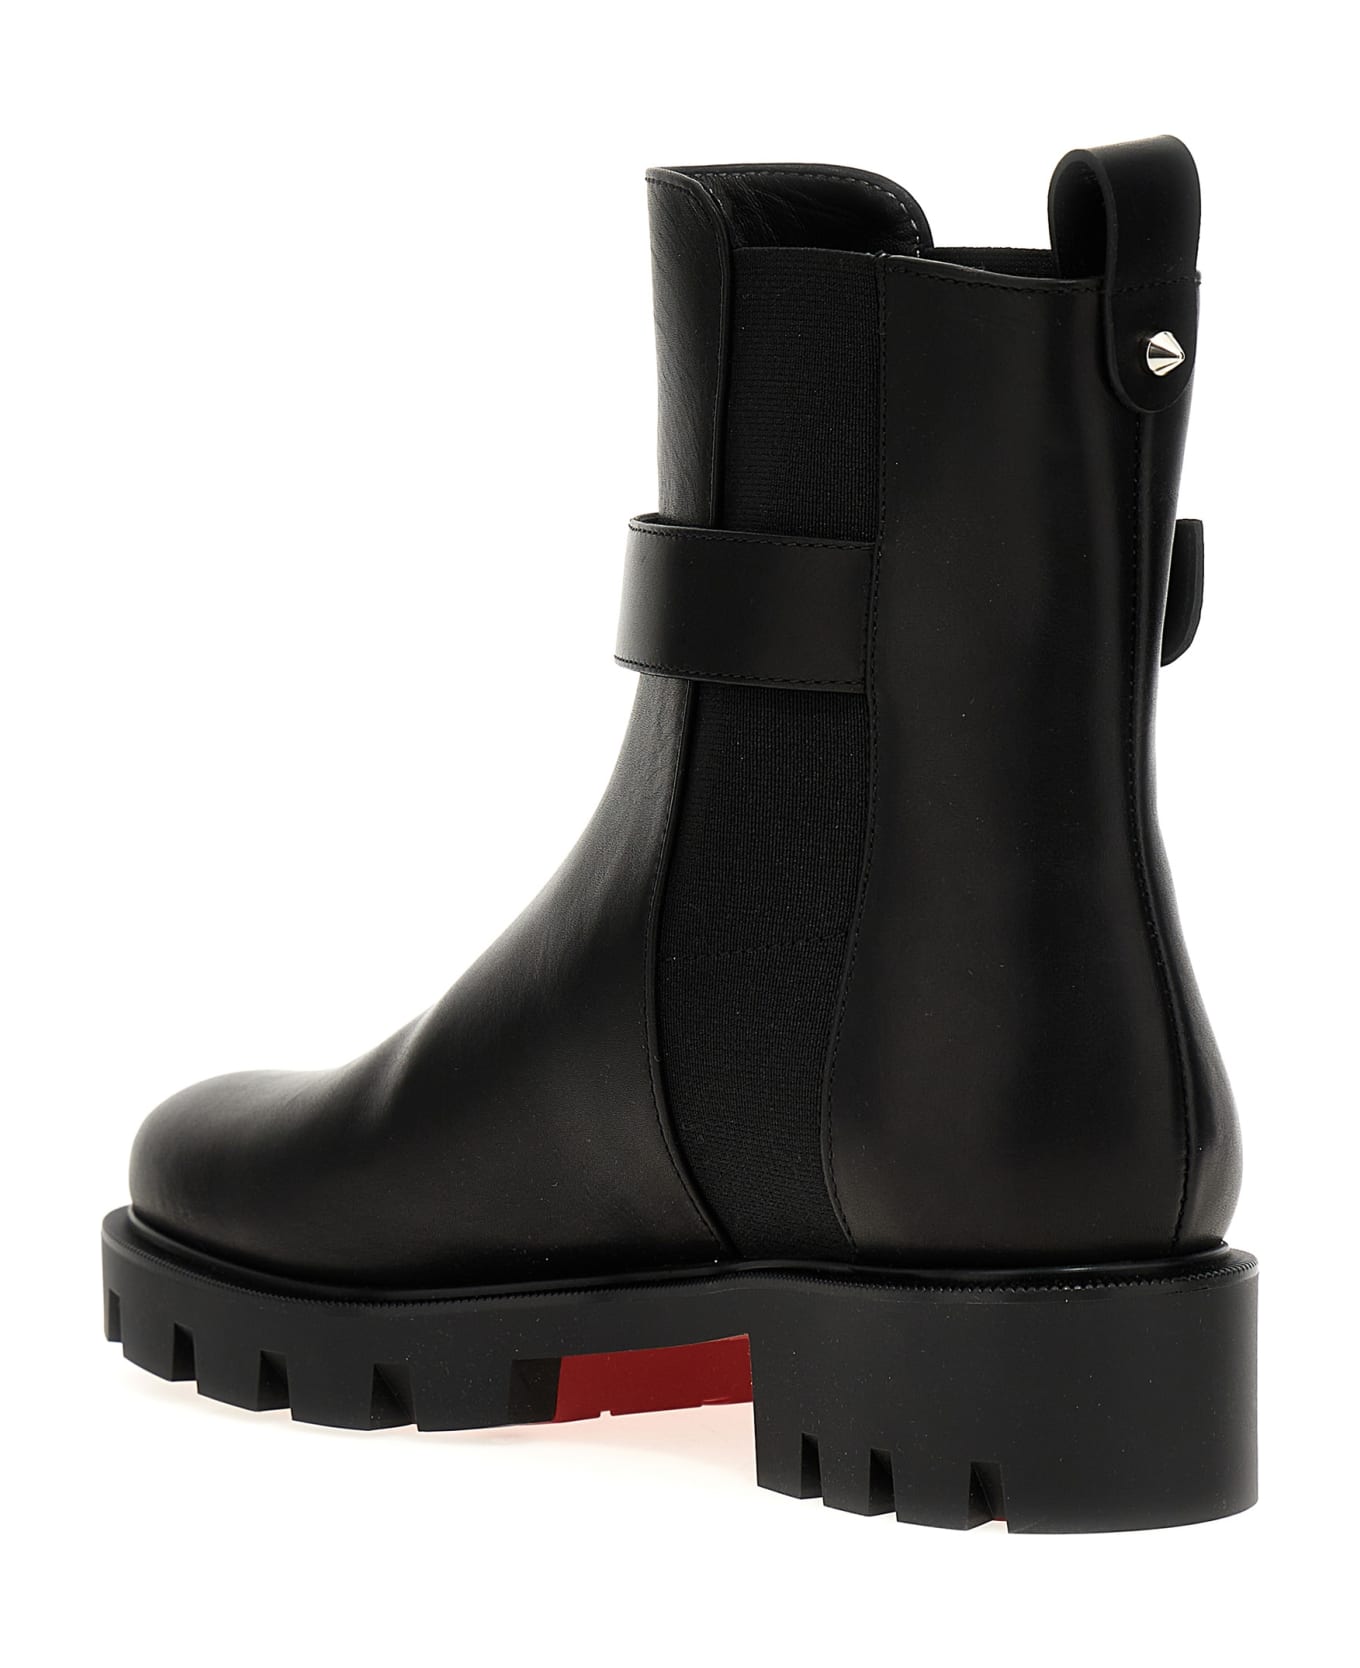 Christian Louboutin 'cl Chelsea Booty Lug' Ankle Boots - Black   ブーツ